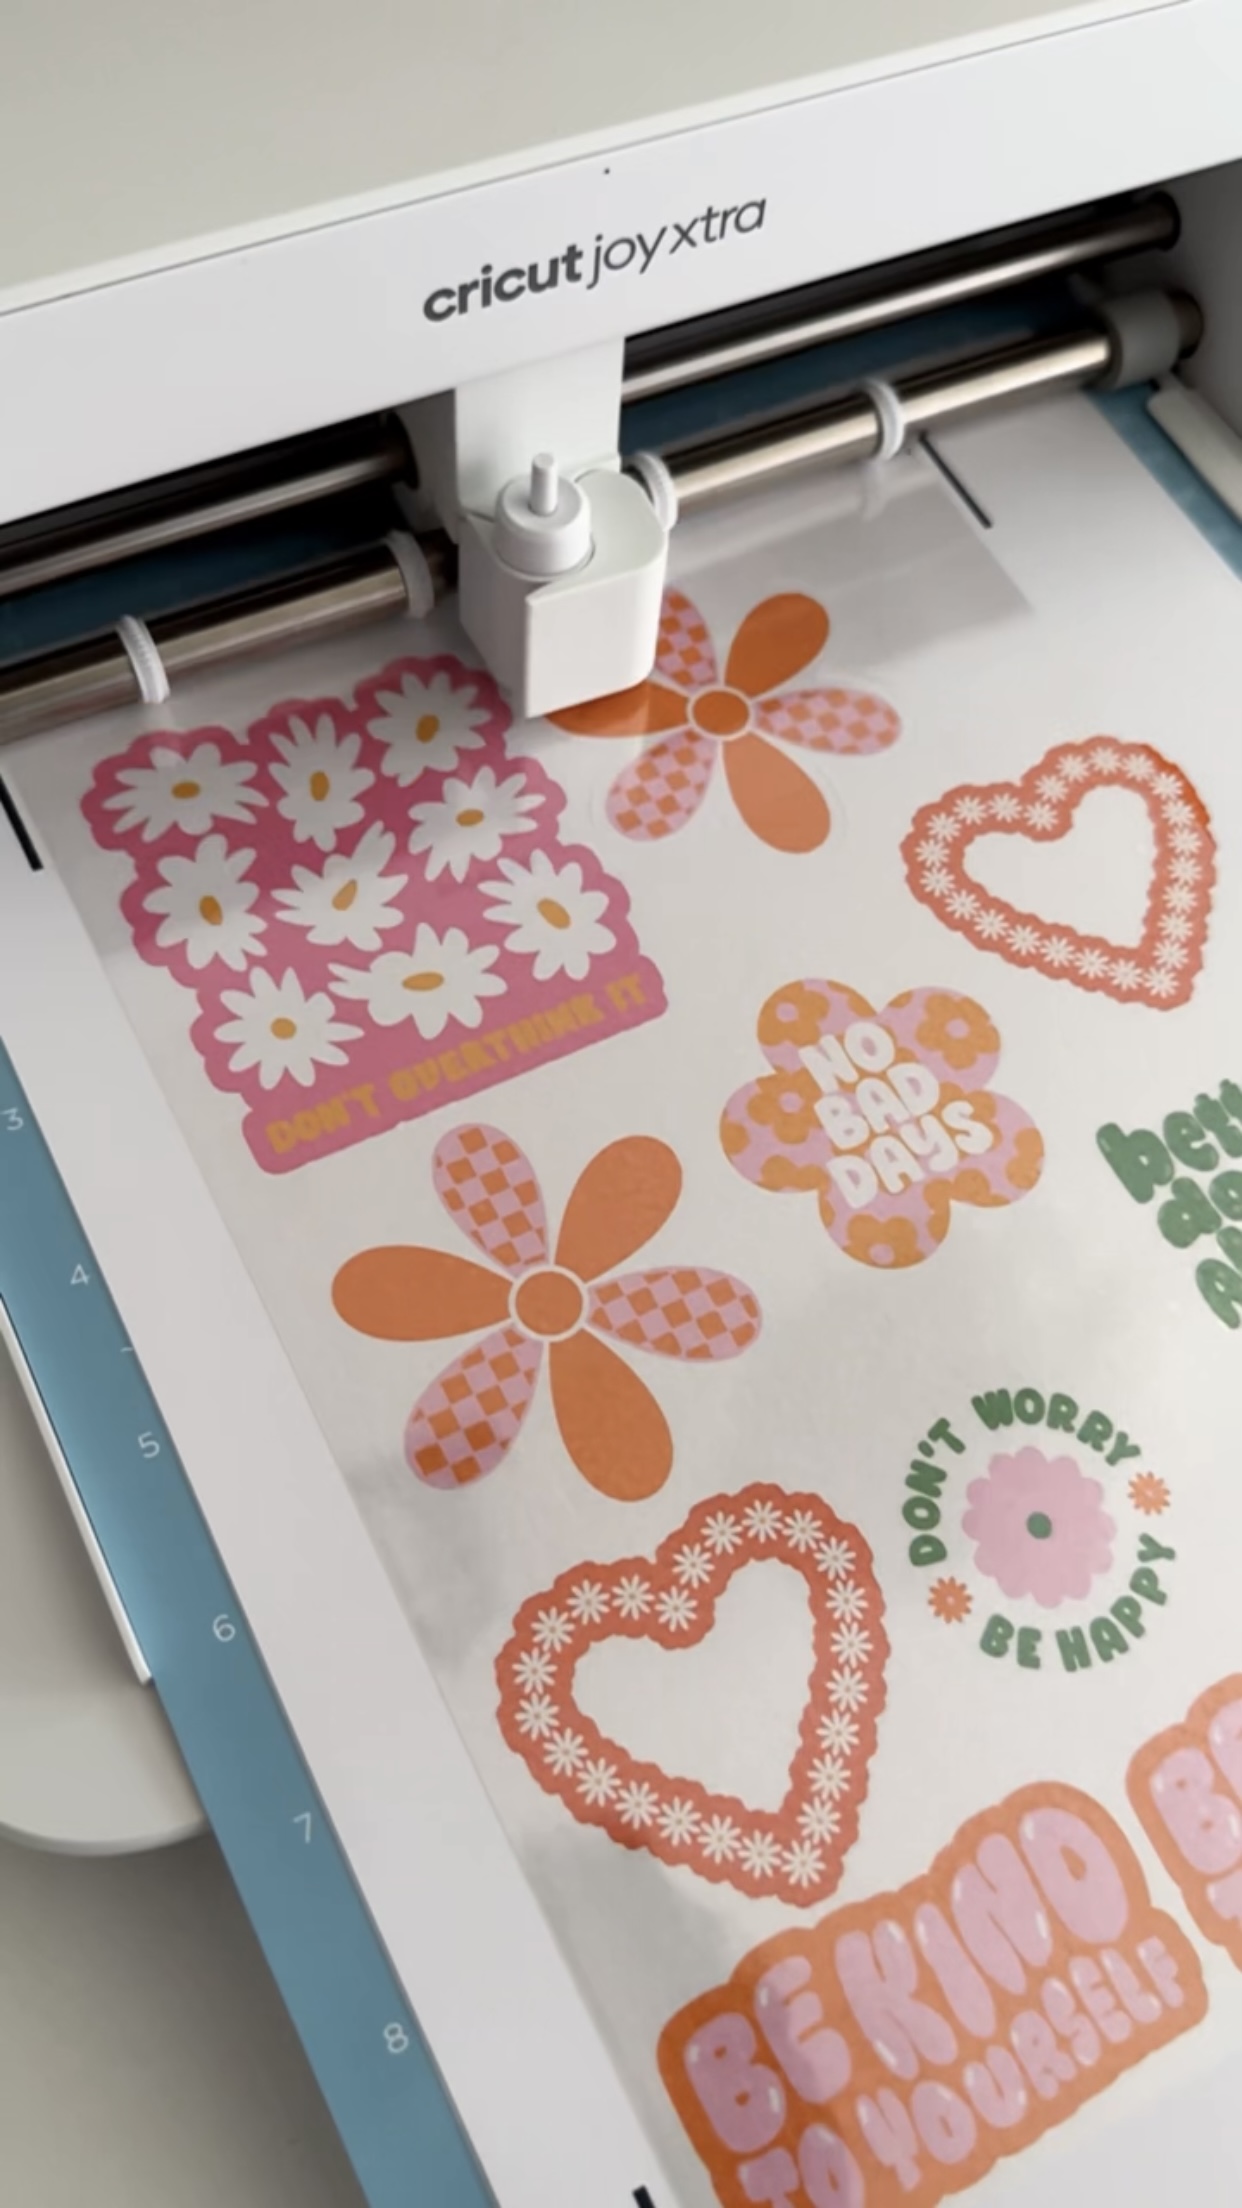 7 Best Cricut Joy Pens for Making Next-Level DIY Projects, by Niamh Aina